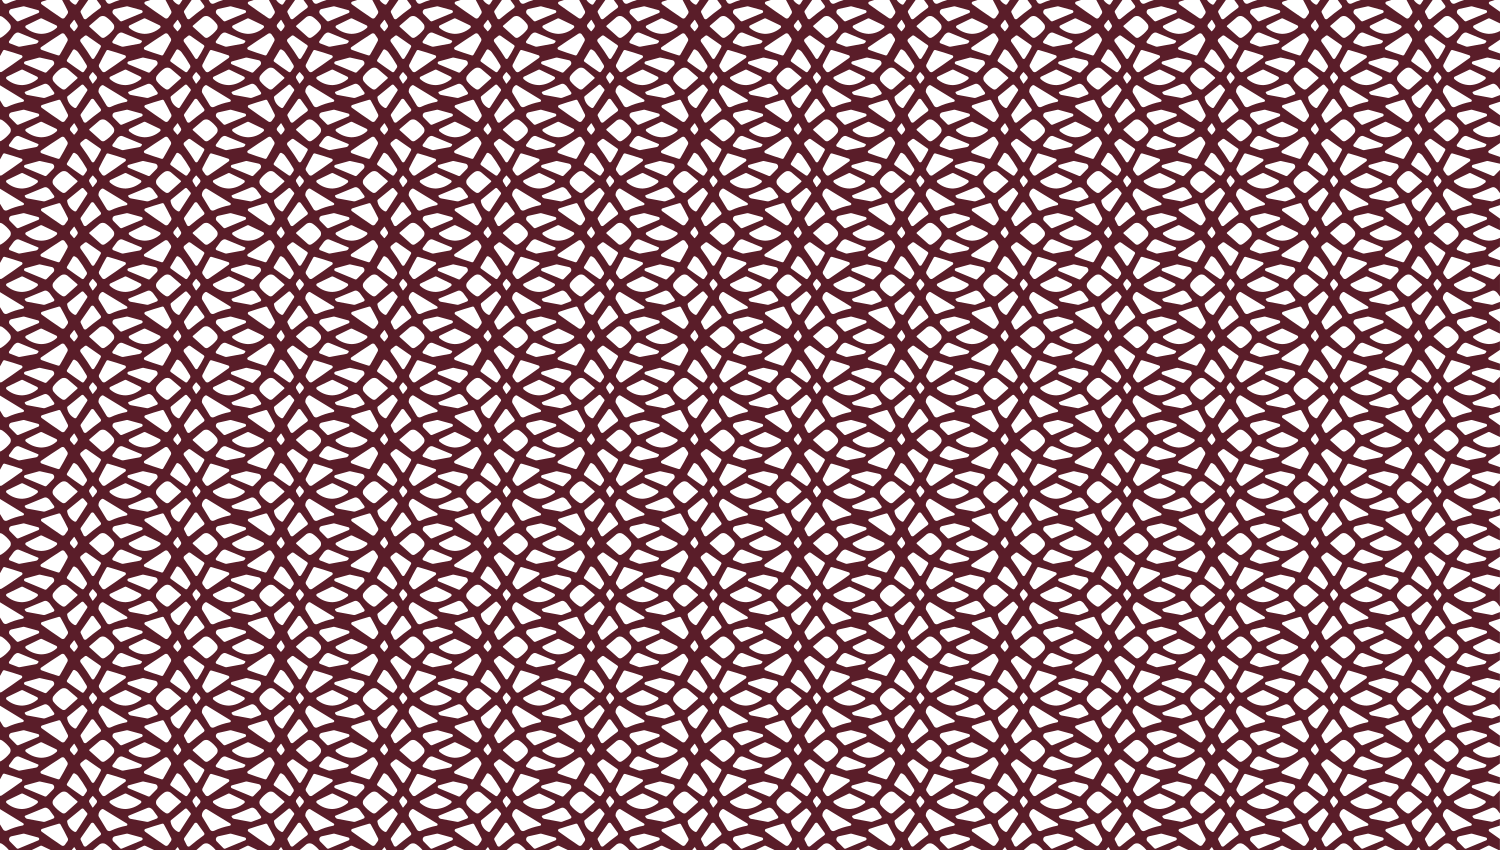 Parasoleil™ Serpentine© pattern displayed with a burgundy color overlay